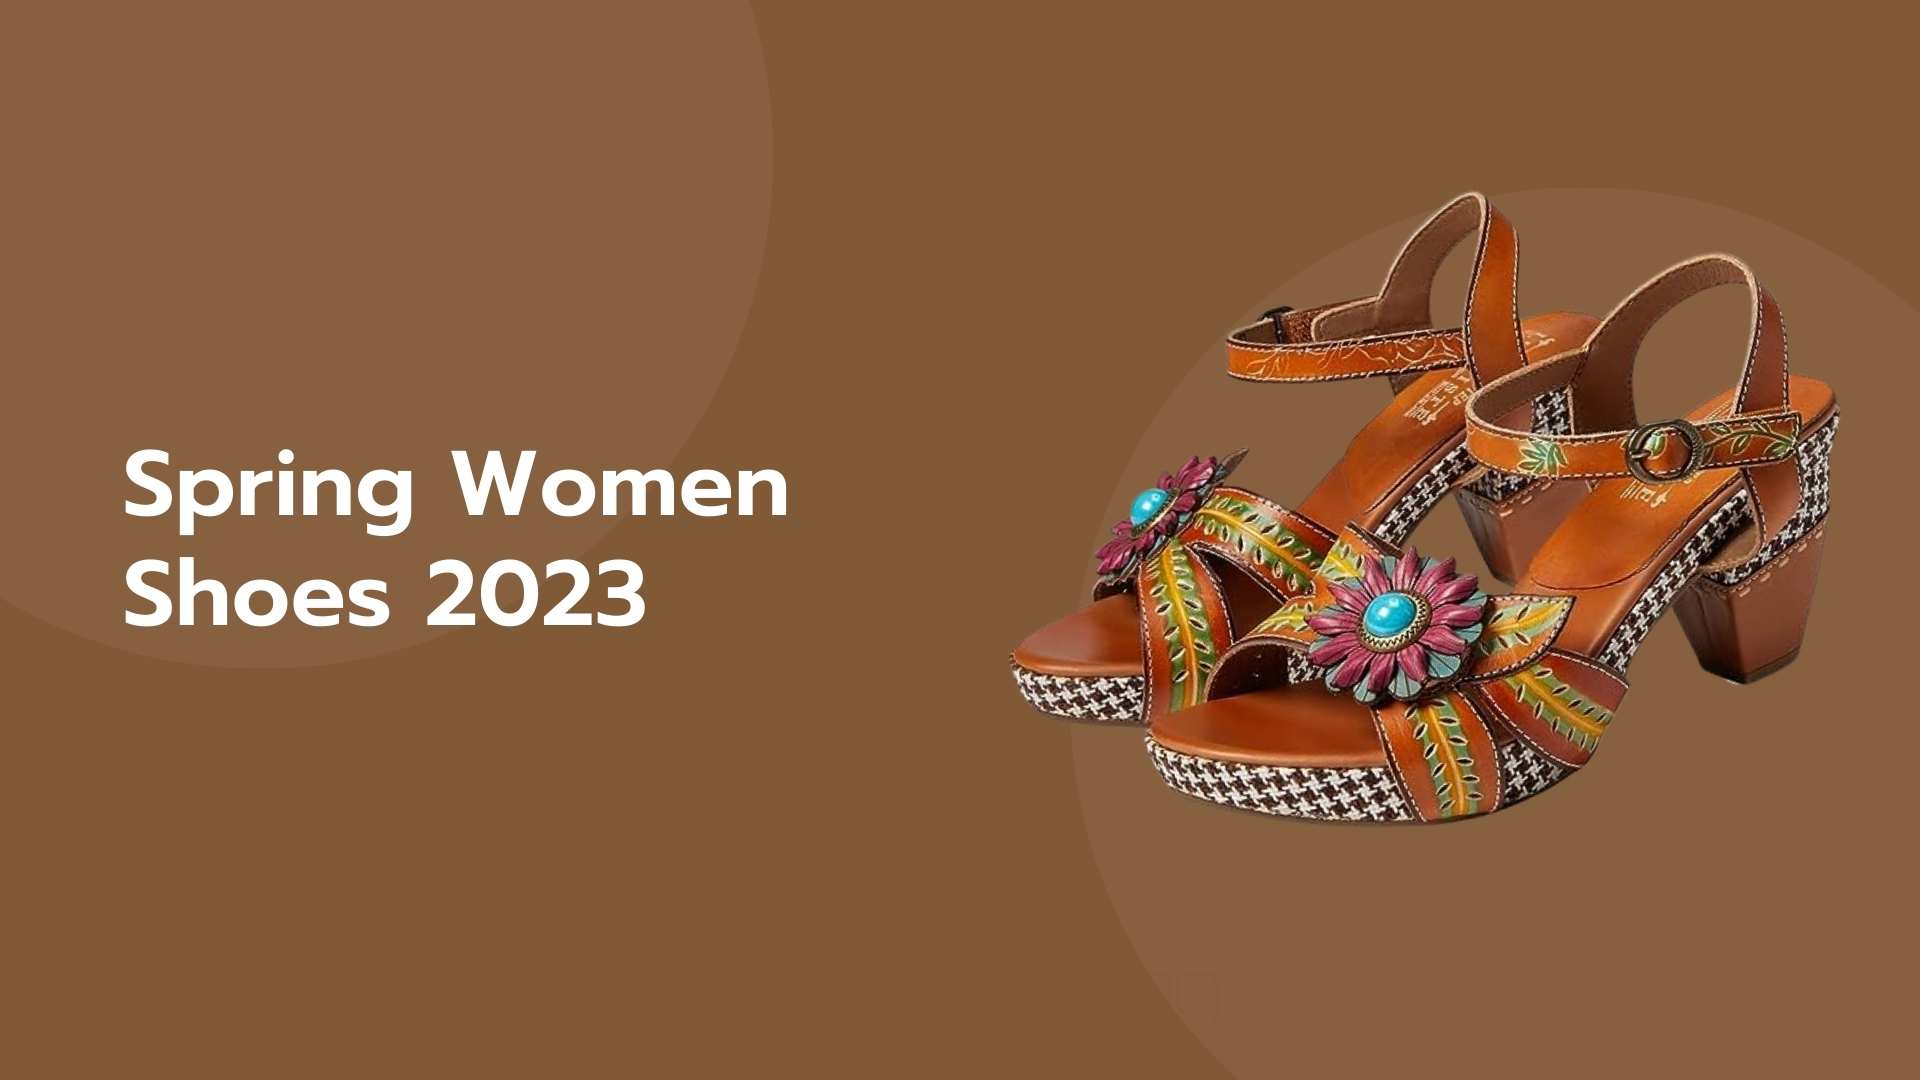 Spring Women Shoes 2023: The Ultimate Guide to Stylish Footwear